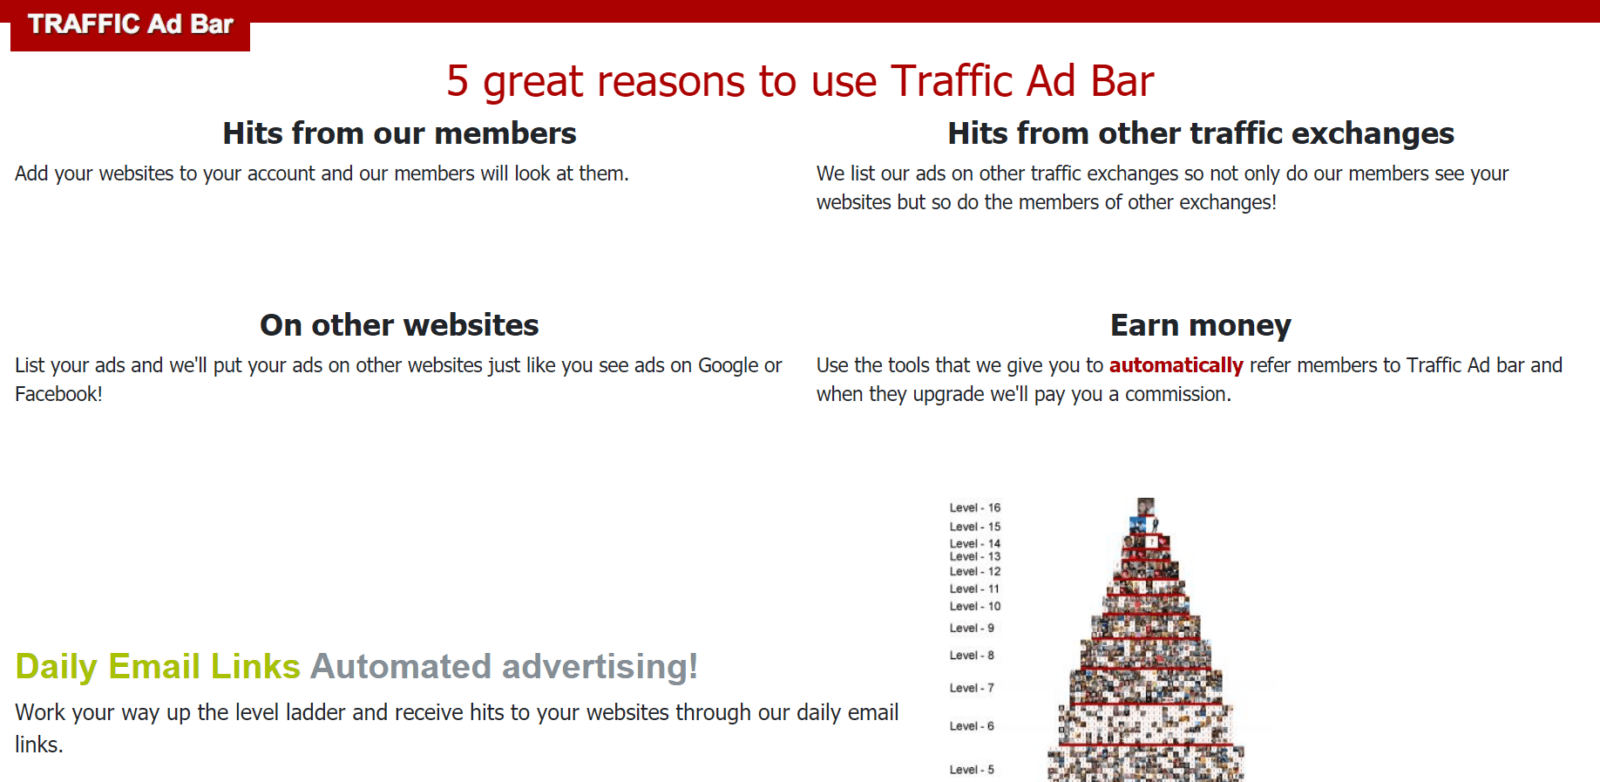 Traffic Ad Bar: Get Free Traffic to Your Page